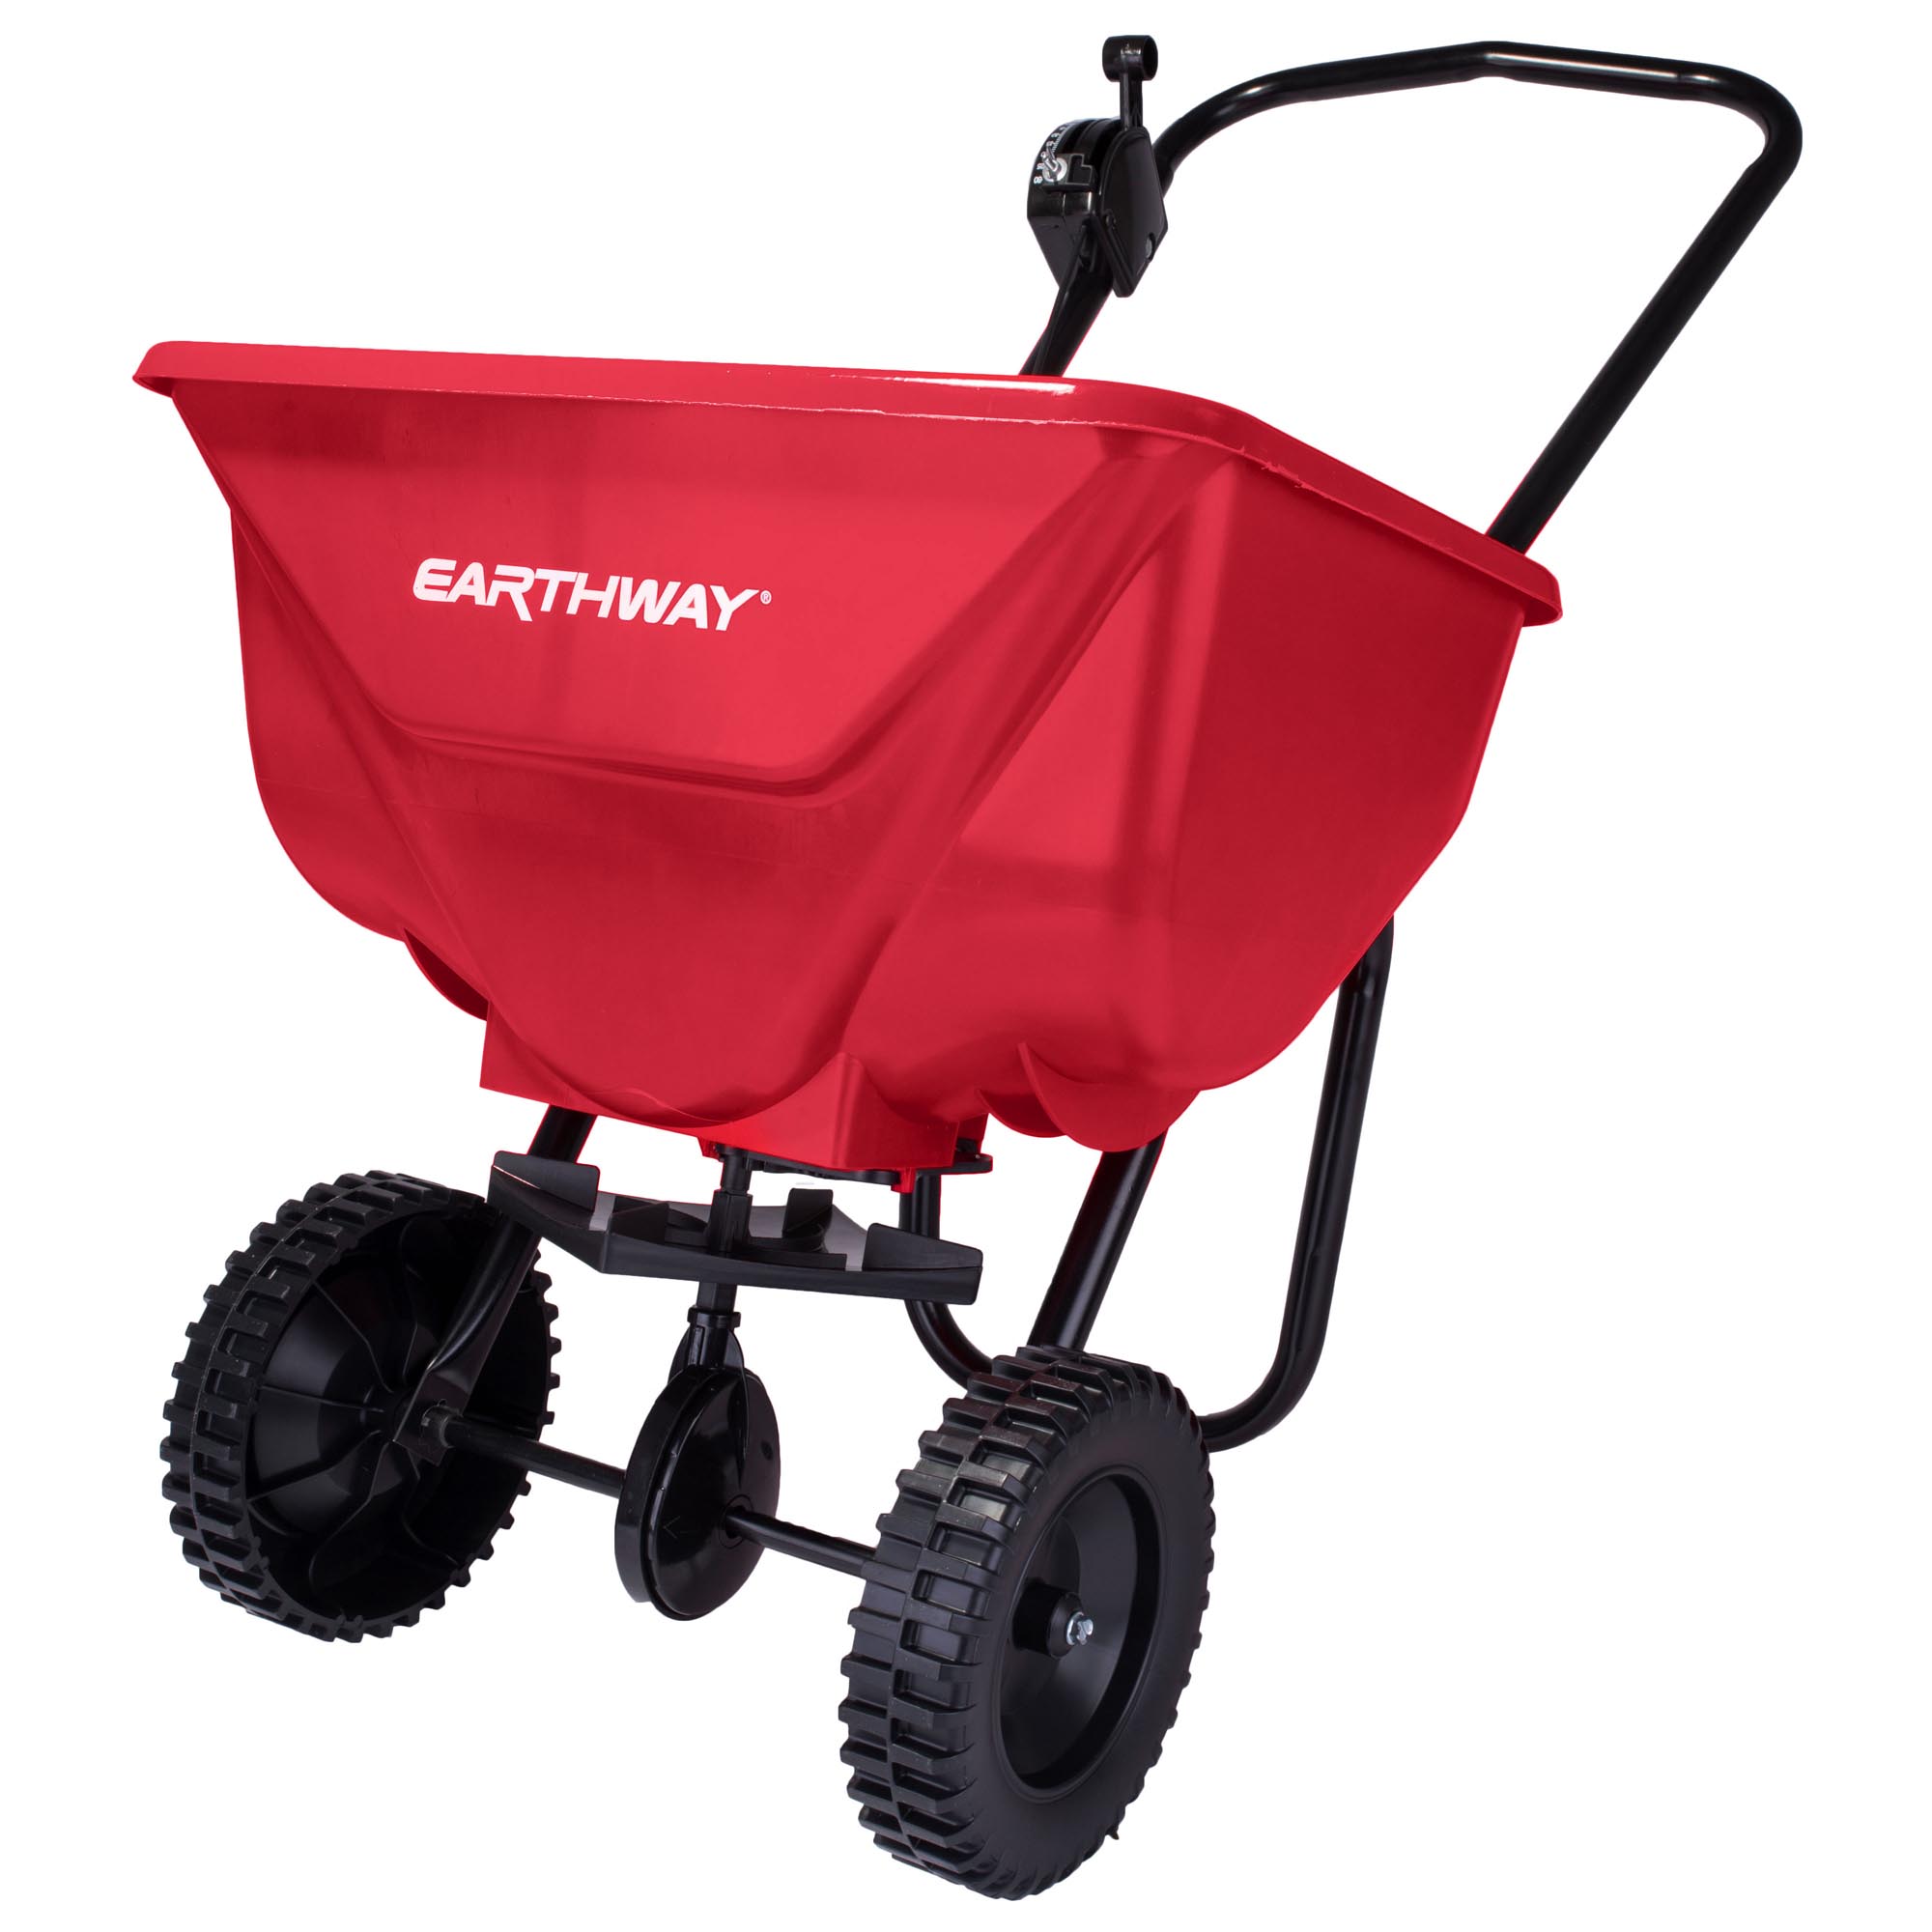 Greenlawn, Greenlawn 65lb Commercial Broadcast Spreader With Poly Tires